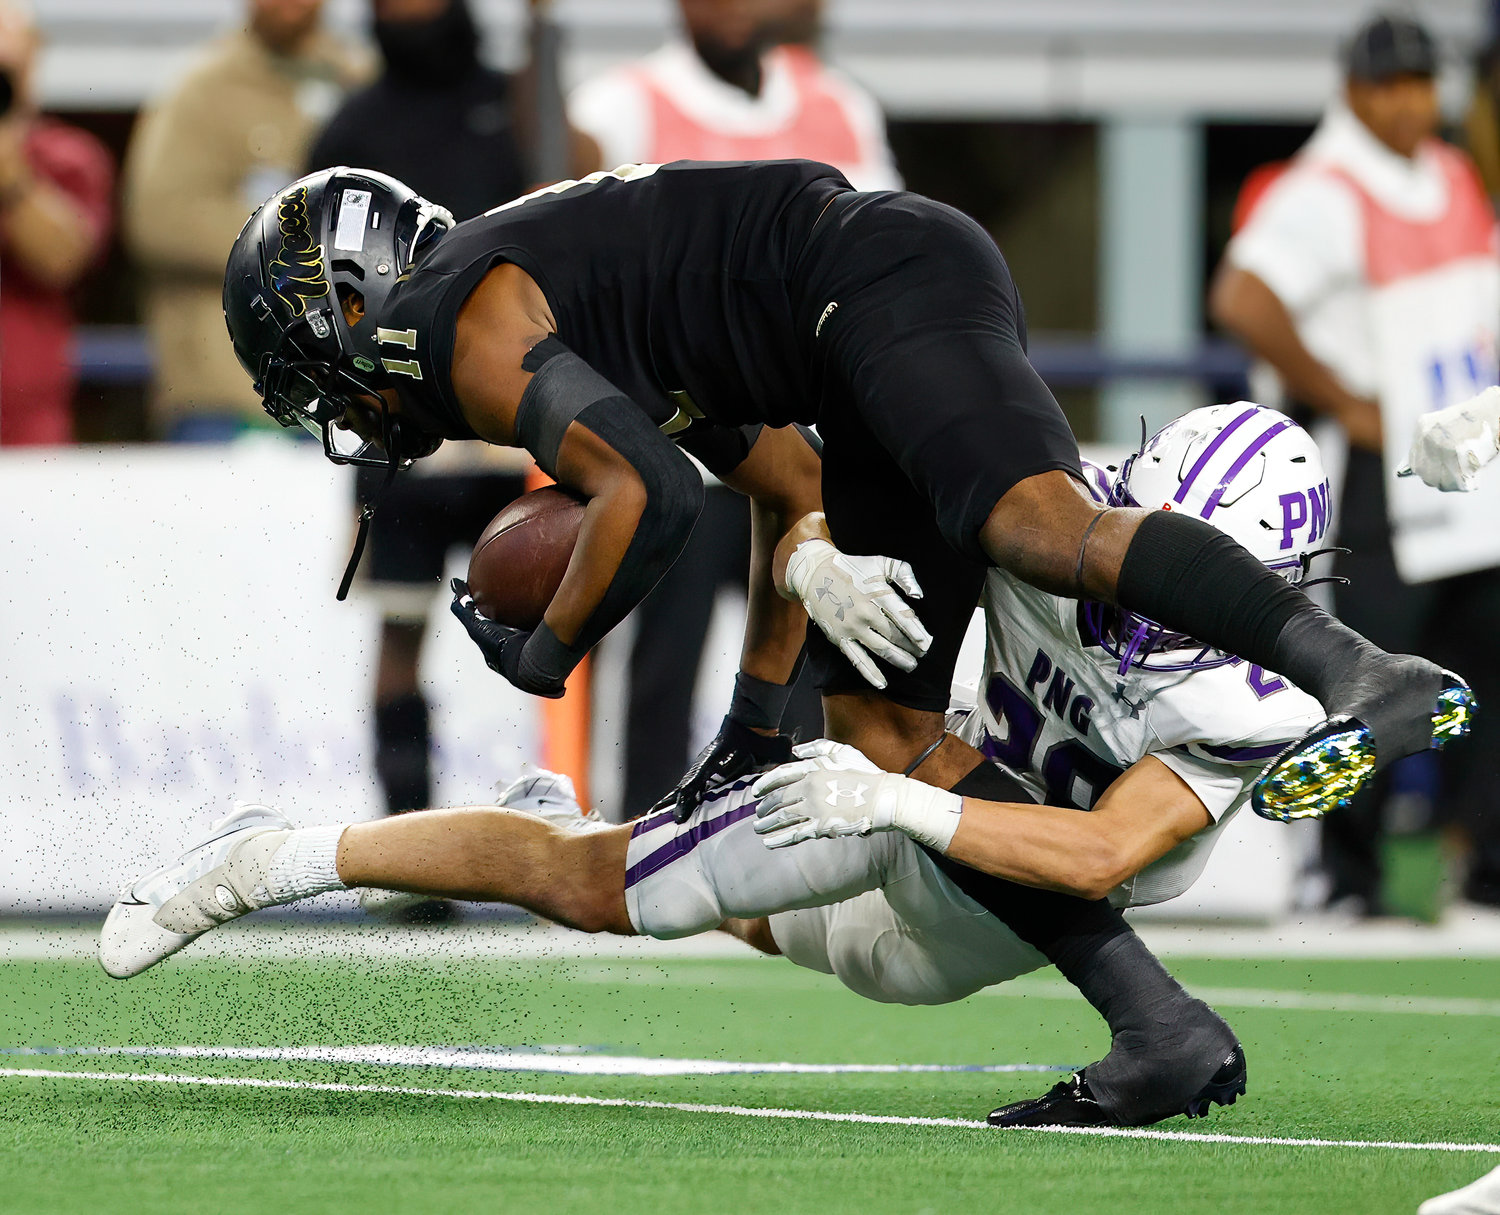 Port Neches-Groves defensive back Reid Richard (28) tackles South Oak Cliff wide receiver Jamyri Cauley (11) during the Class 5A Division II football state championship game between South Oak Cliff and Port Neches-Groves in Arlington, Texas, on Dec. 16, 2022.